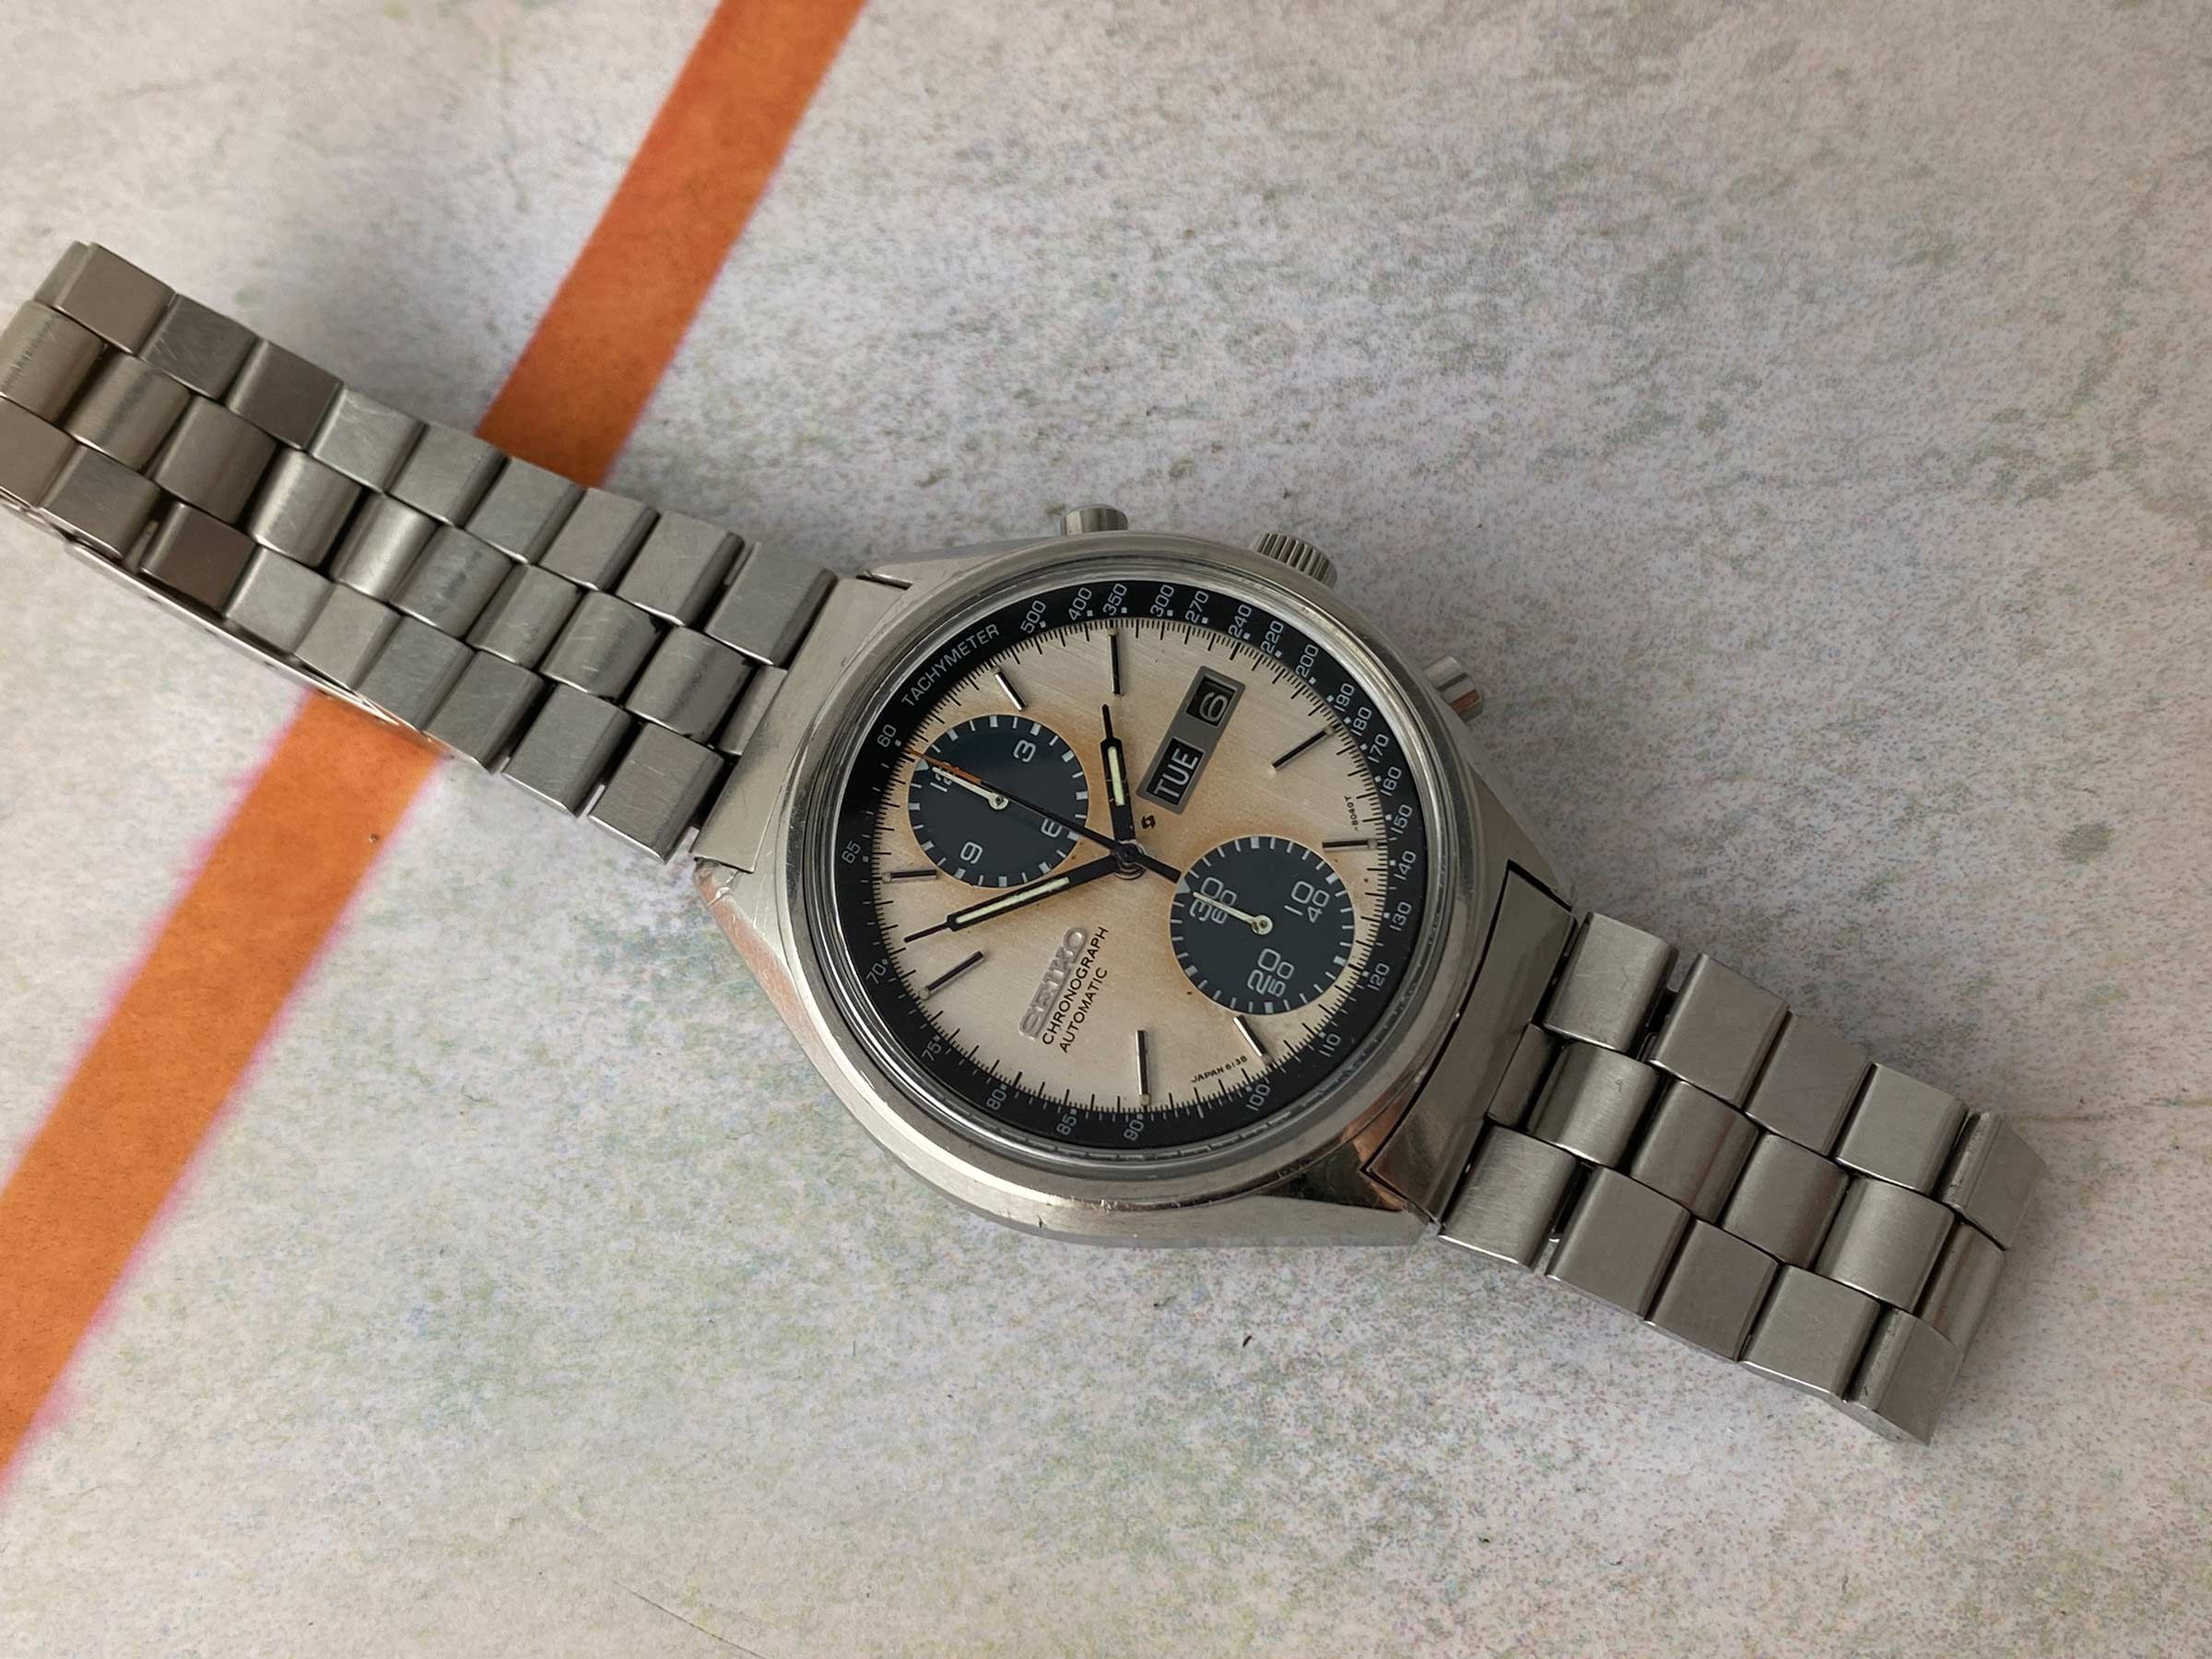 Seiko PANDA Vintage automatic chronograph watch 1977 Cal. for $2,149 for  sale from a Trusted Seller on Chrono24